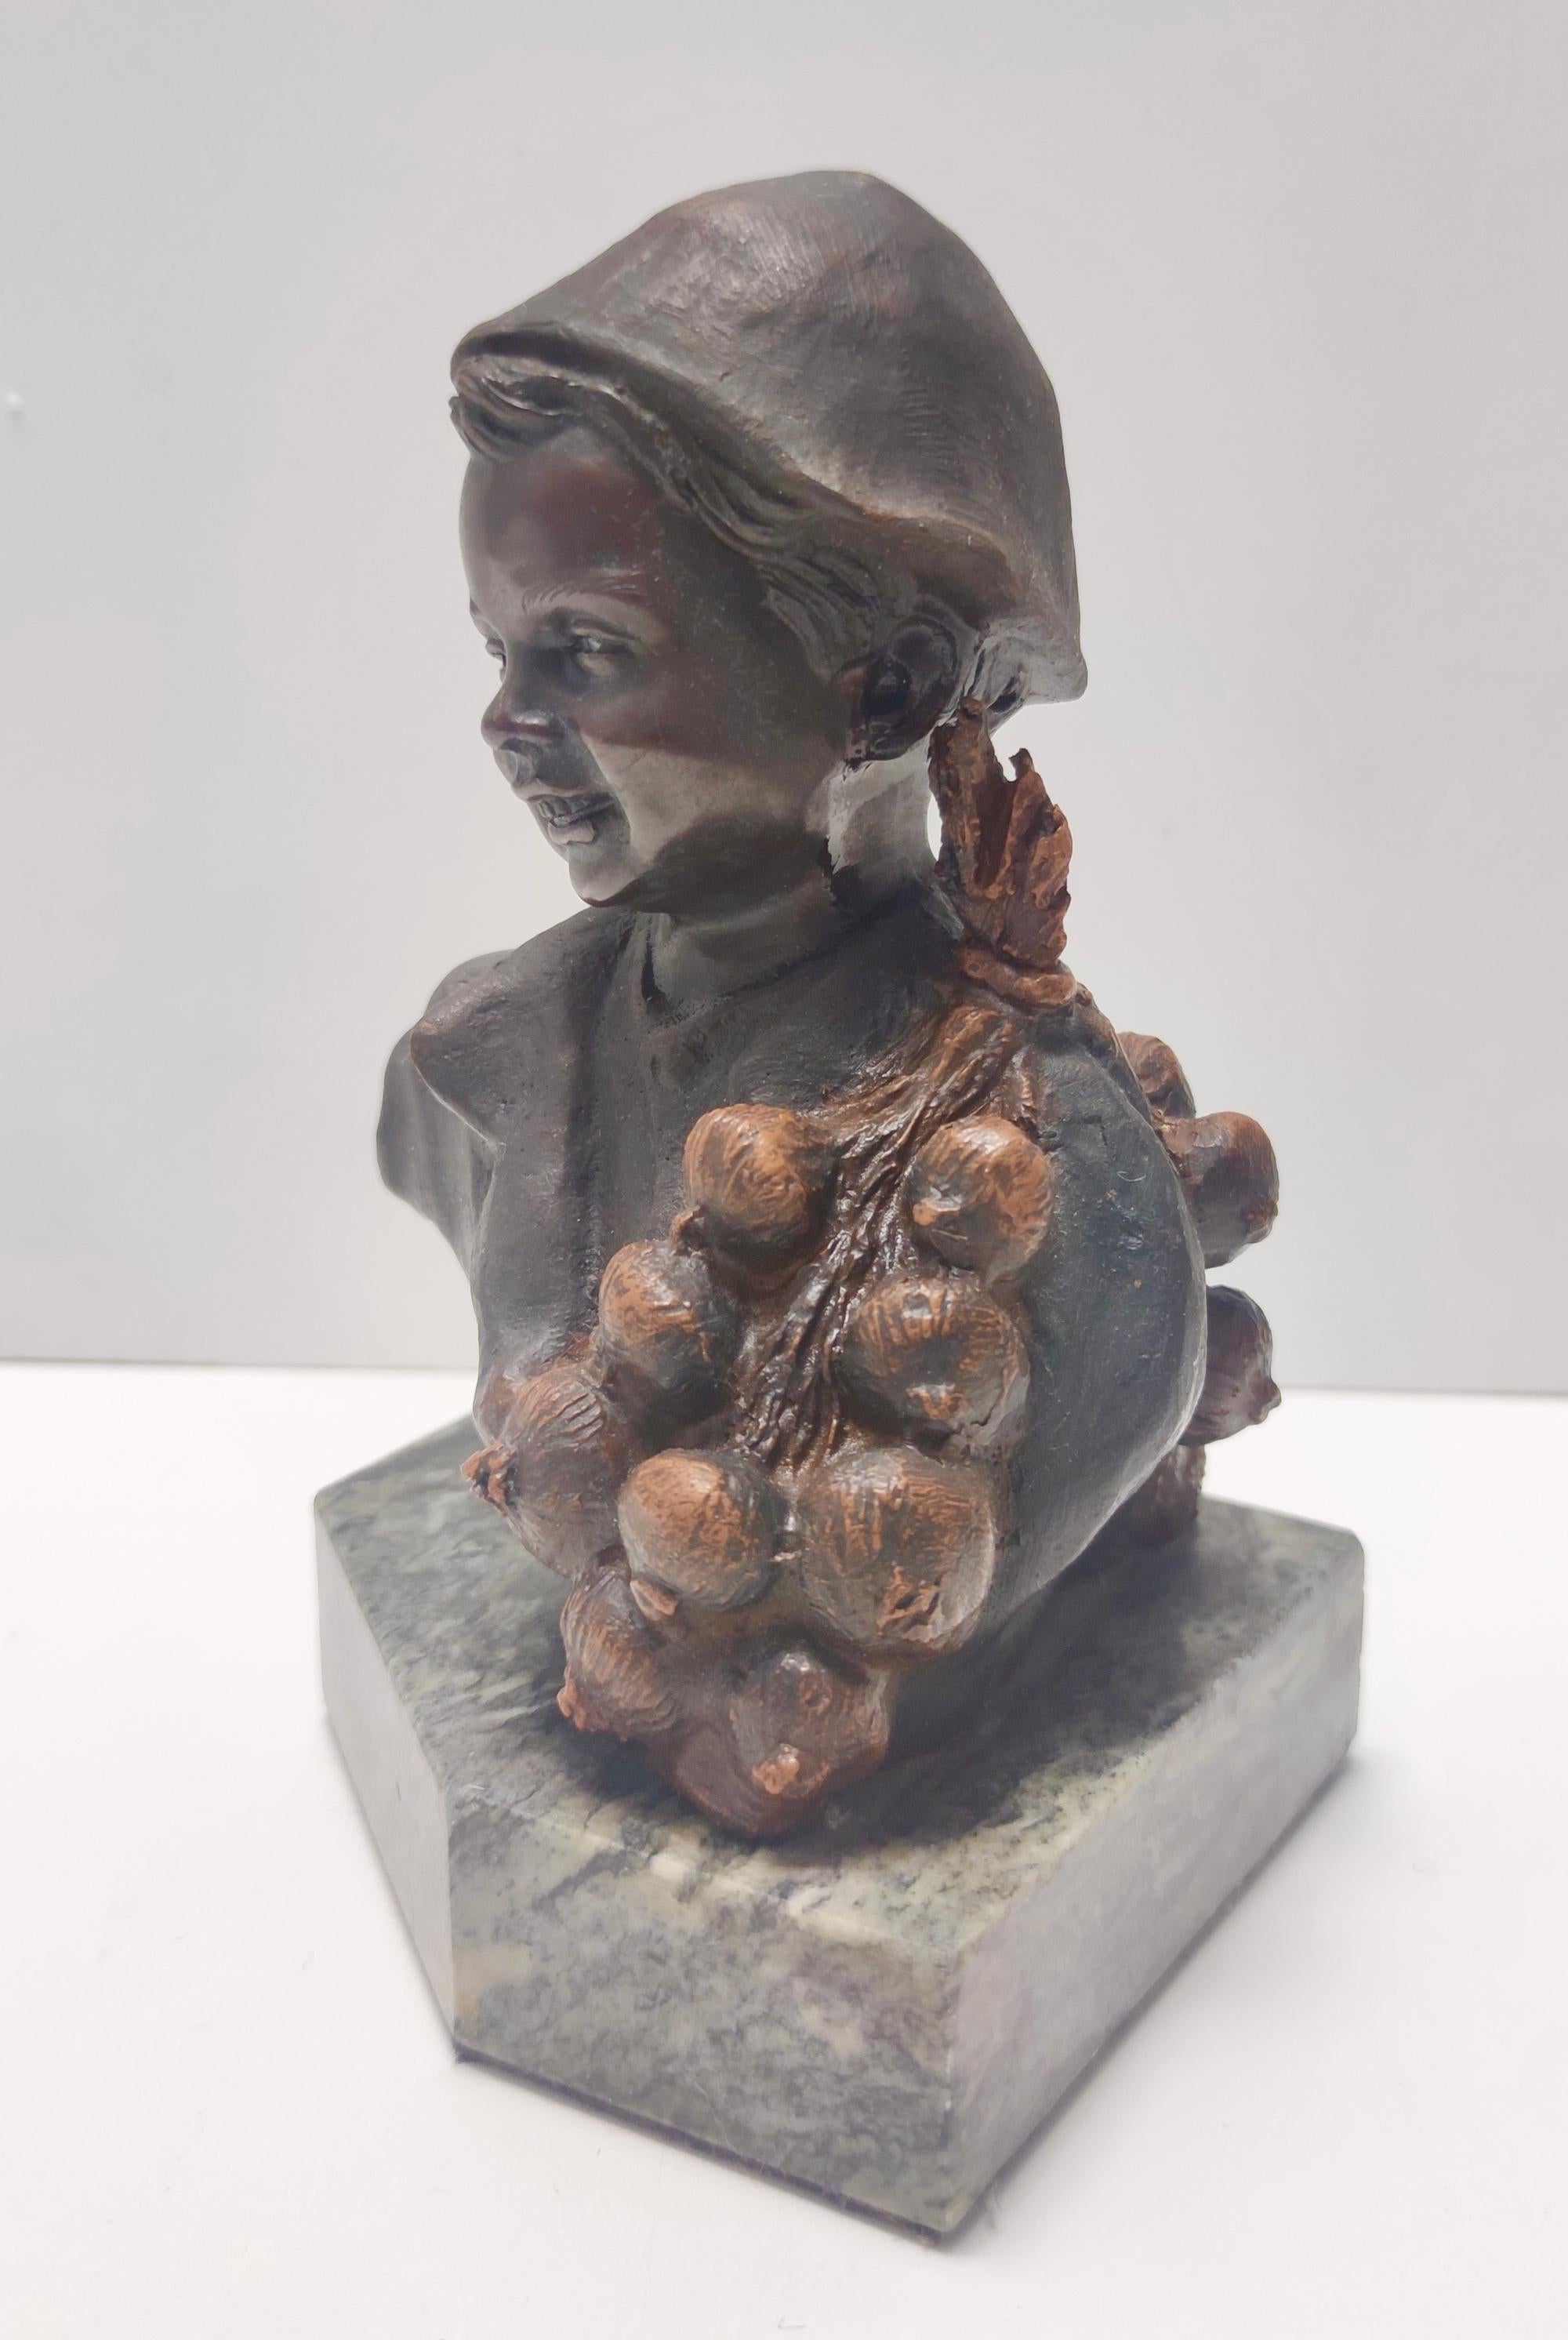 Vintage Bronze Decorative Item of a Child Selling Onions by De Martino, Italy For Sale 1